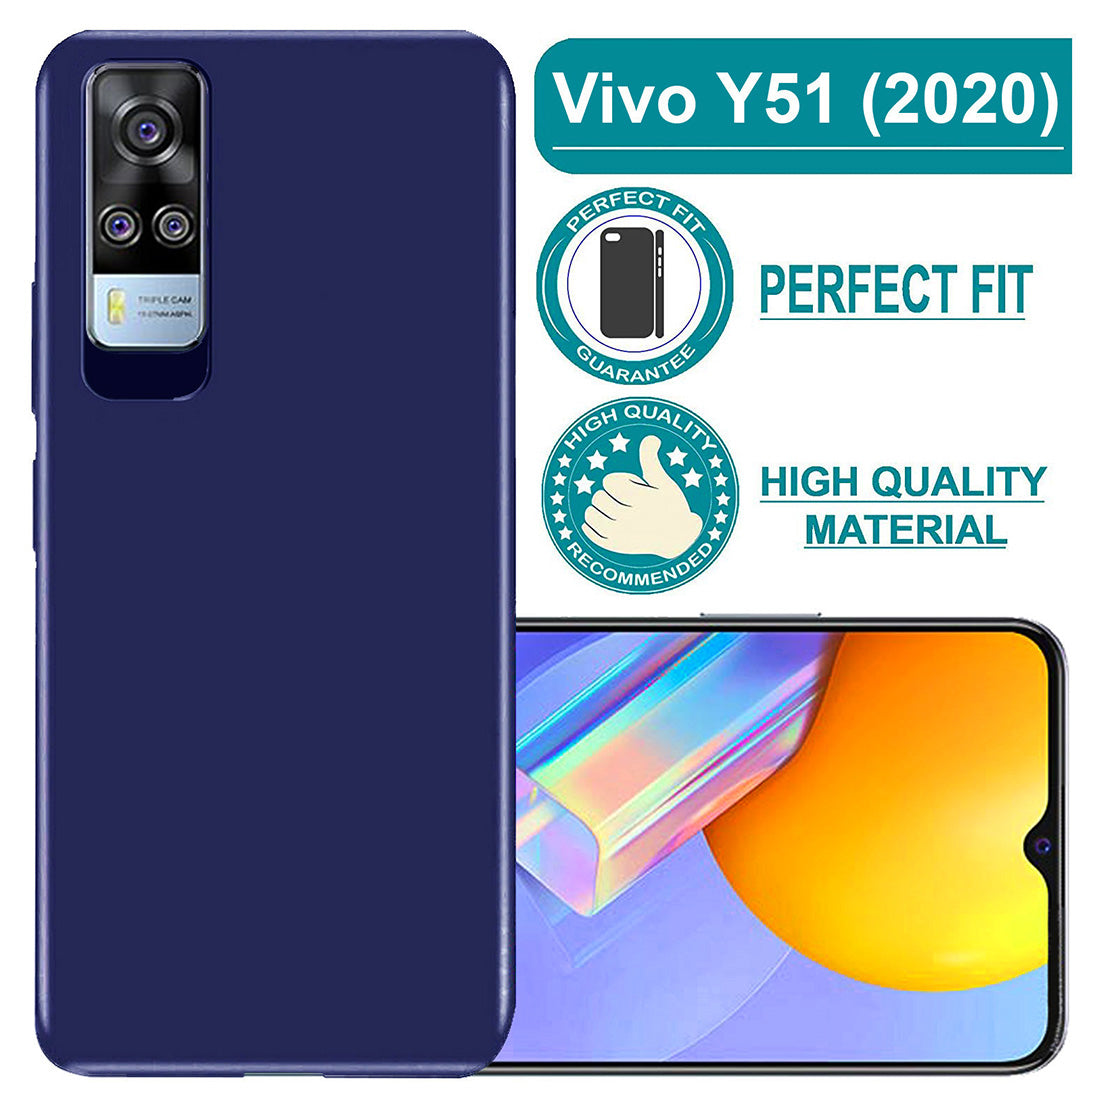 Matte Finish TPU Back Cover for Vivo Y51A / Y51 (2020) / Y31 (2021)